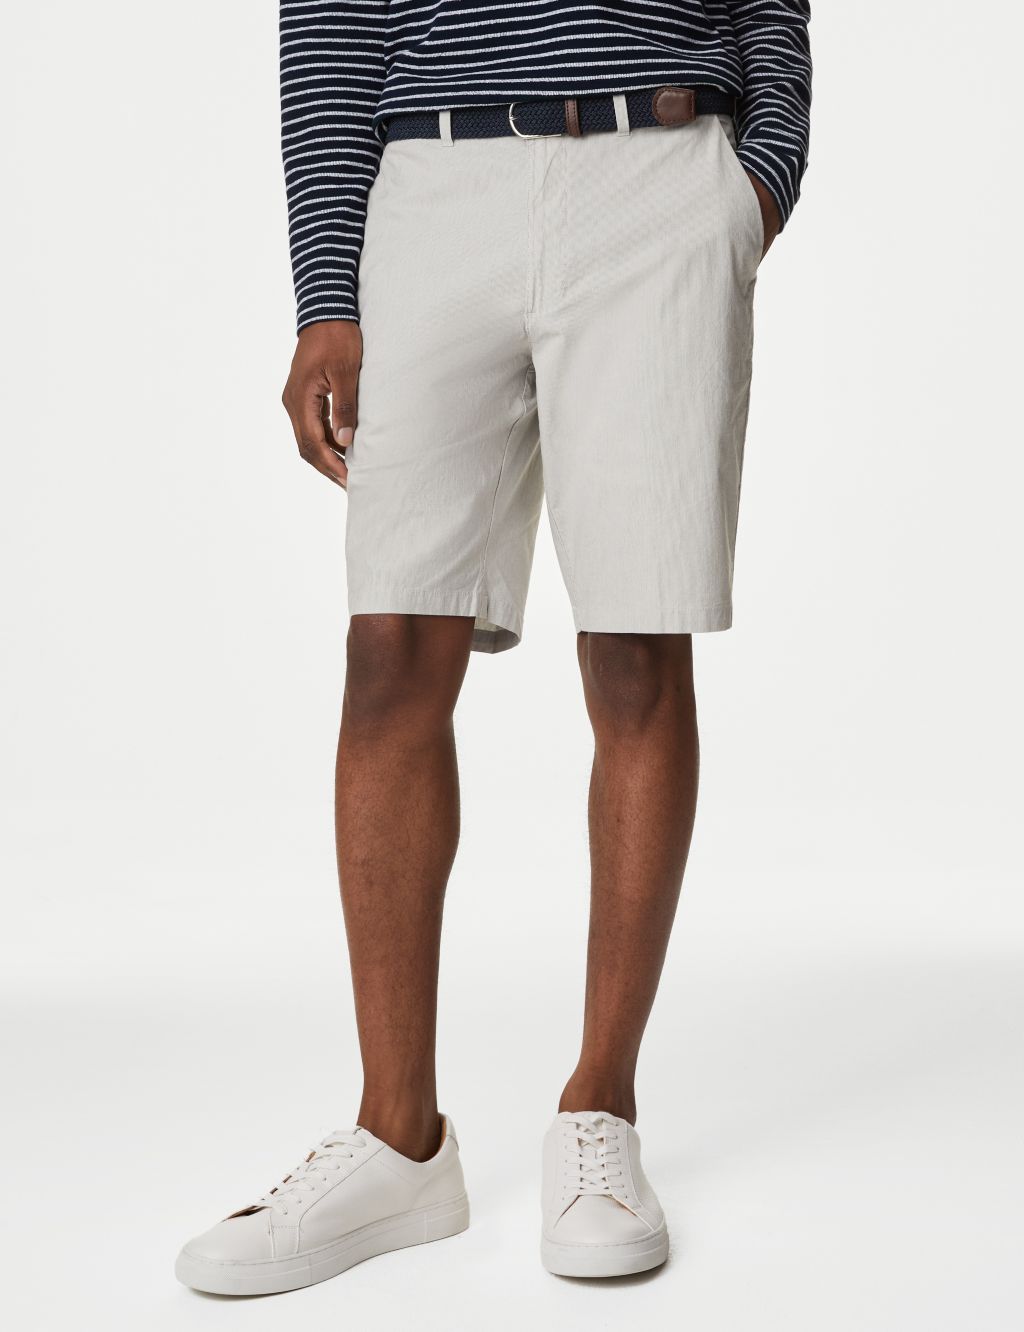 Striped Belted Stretch Chino Shorts image 3